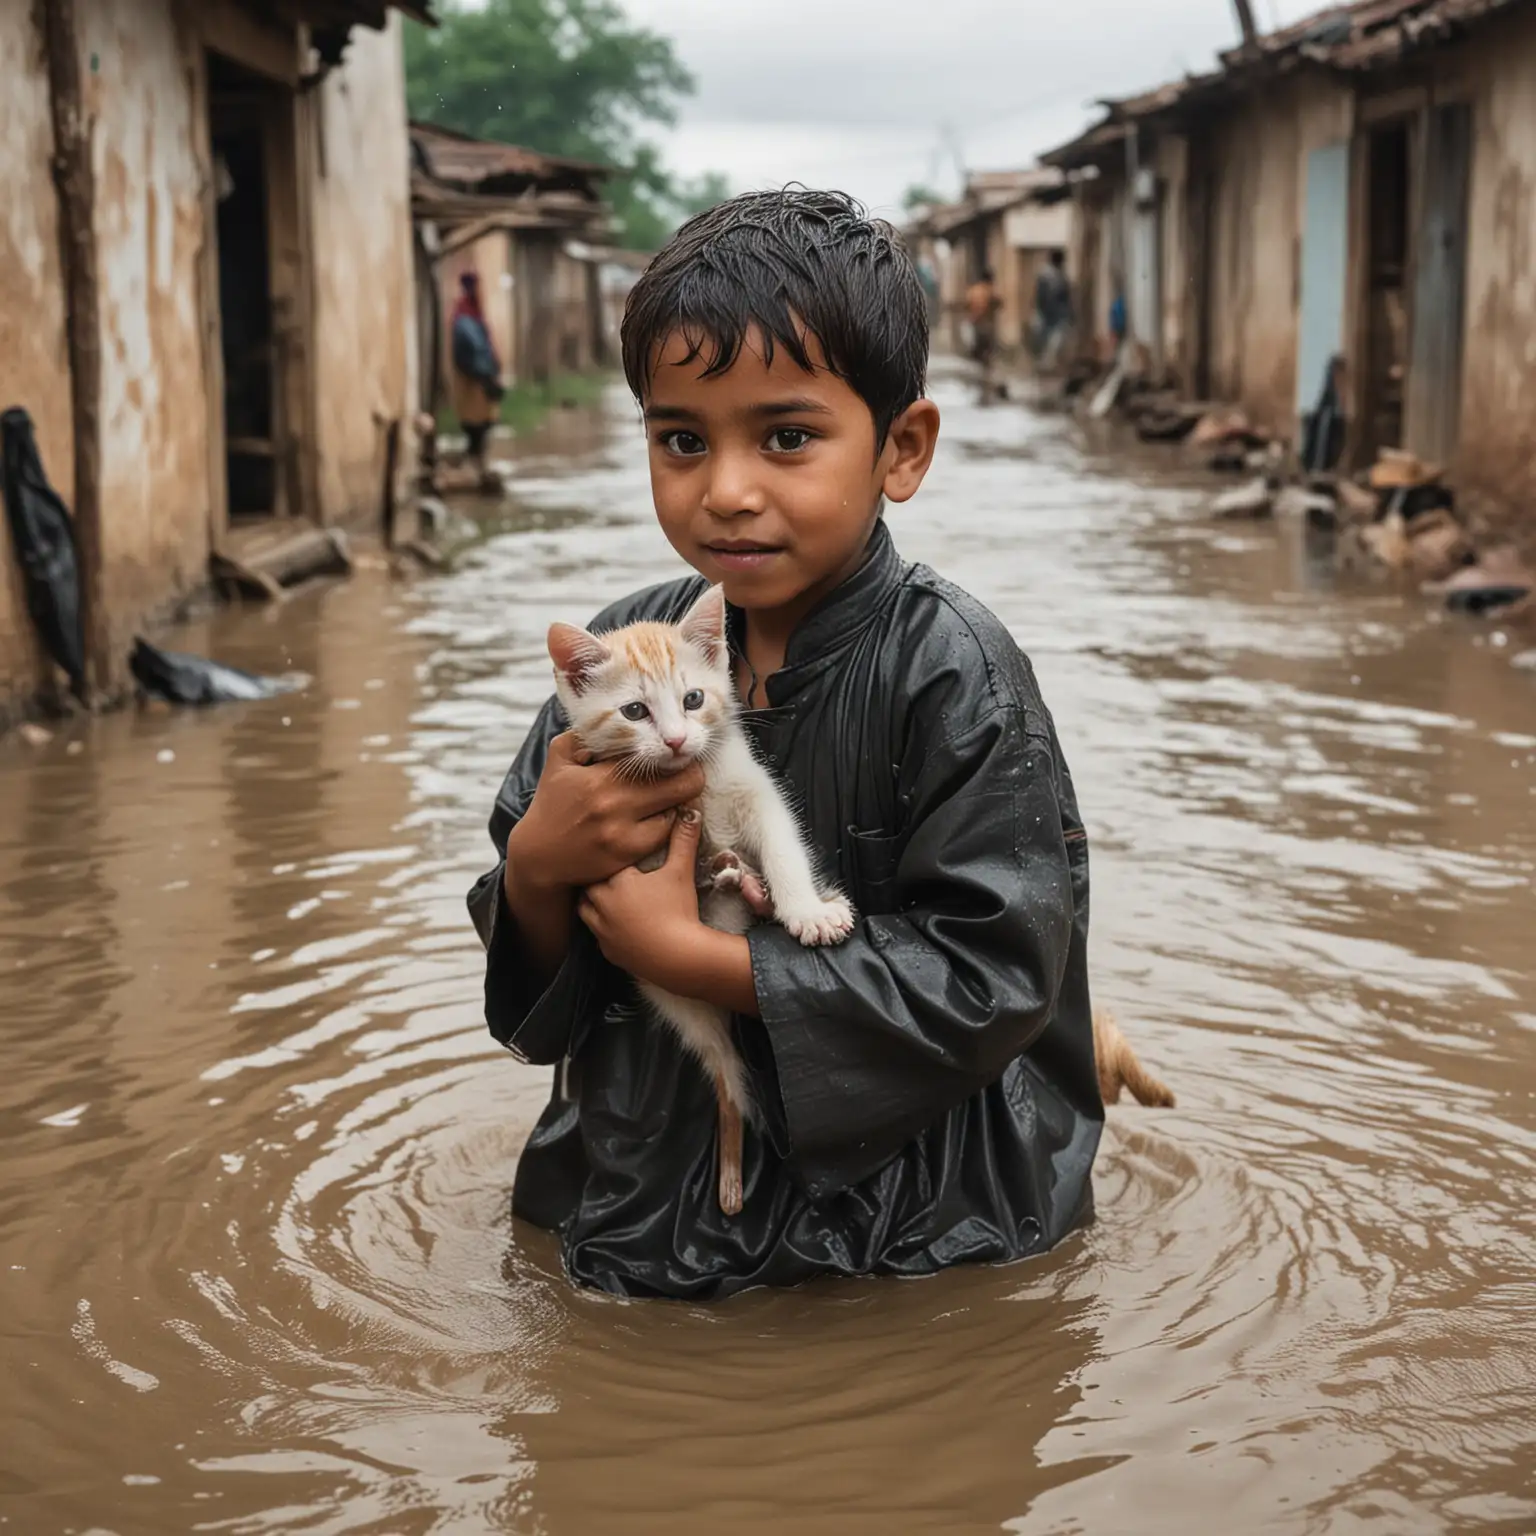 /imagine prompt: In a war-torn village, an orphaned Muslim child bravely rescues a tiny kitten from rising floodwaters, the child's hands tenderly cradling the frightened animal, debris scattered around, sunlight piercing through the storm clouds, capturing the child's hopeful expression and the kitten's vulnerability, Photography, DSLR camera with a 50mm lens, f/2.8 aperture, --ar 16:9 --v 5